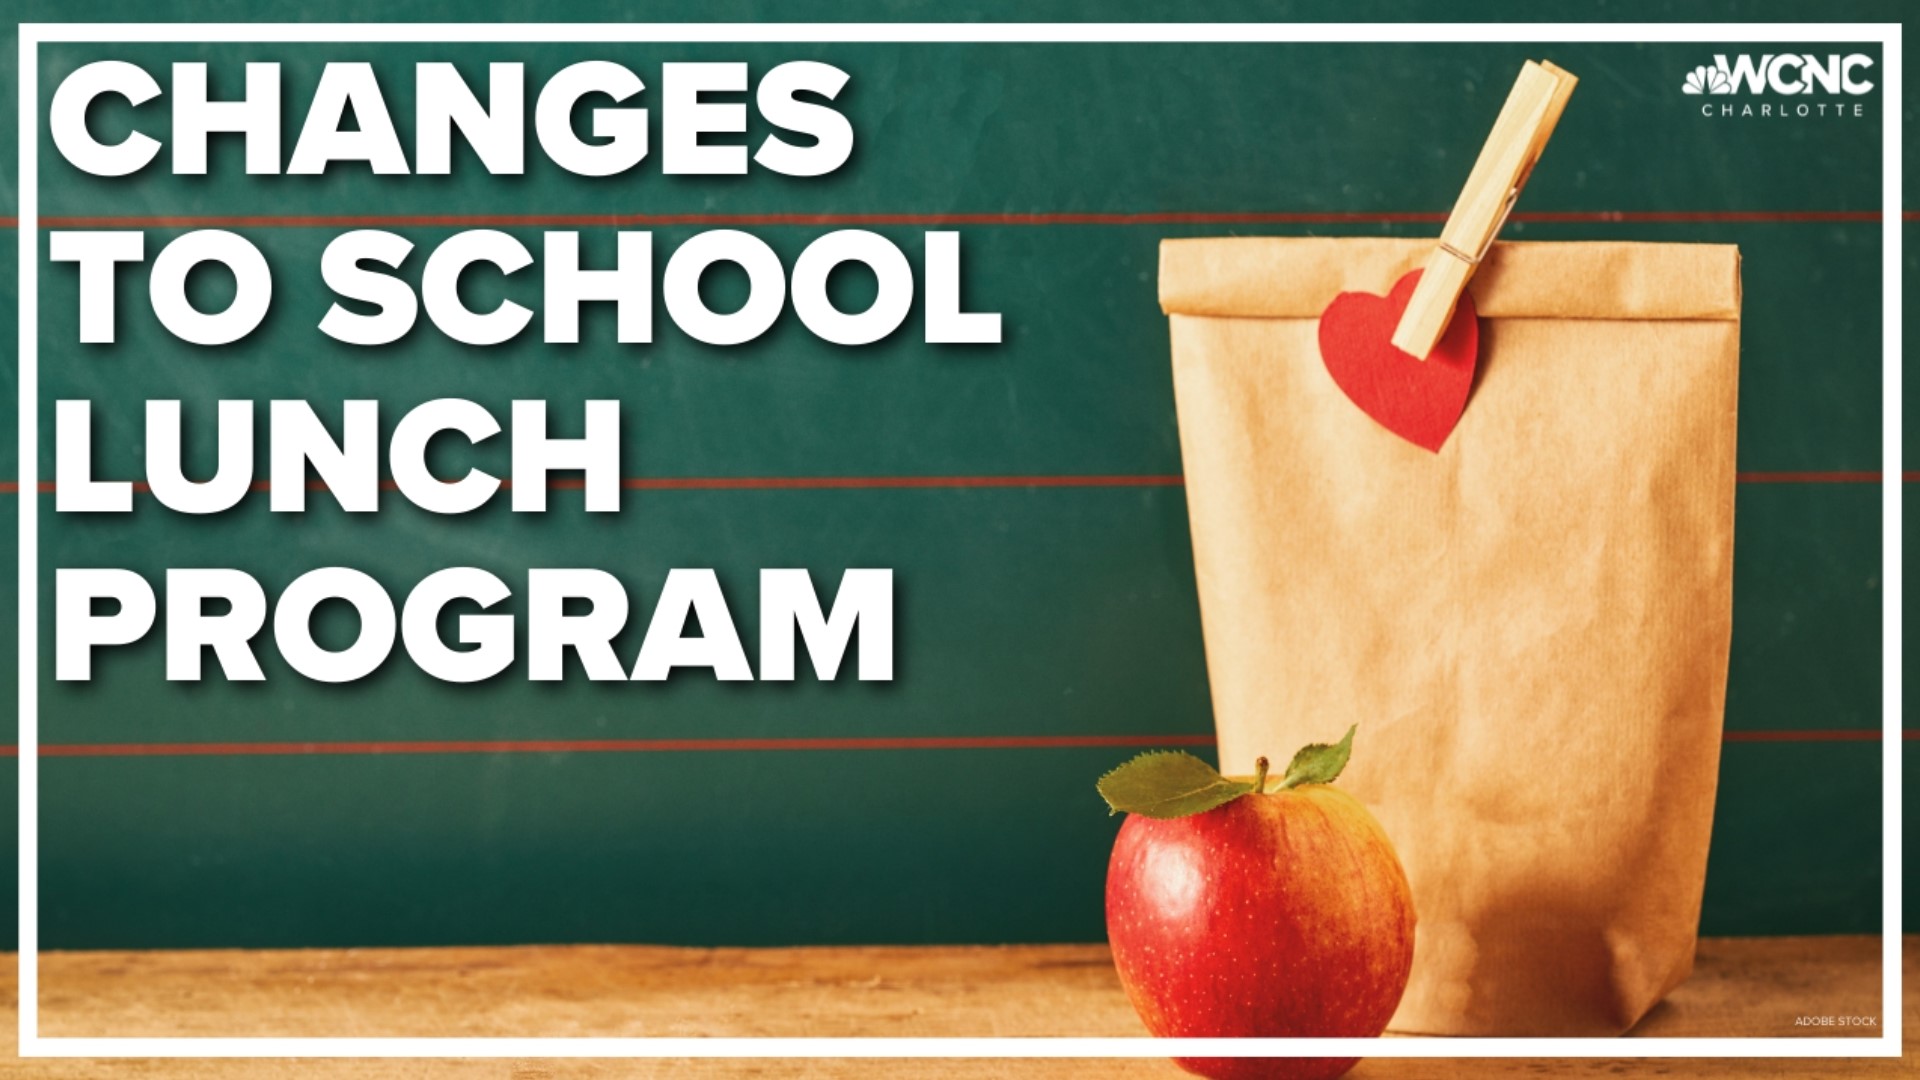 Changes are coming to how your child will get lunch at school this year.